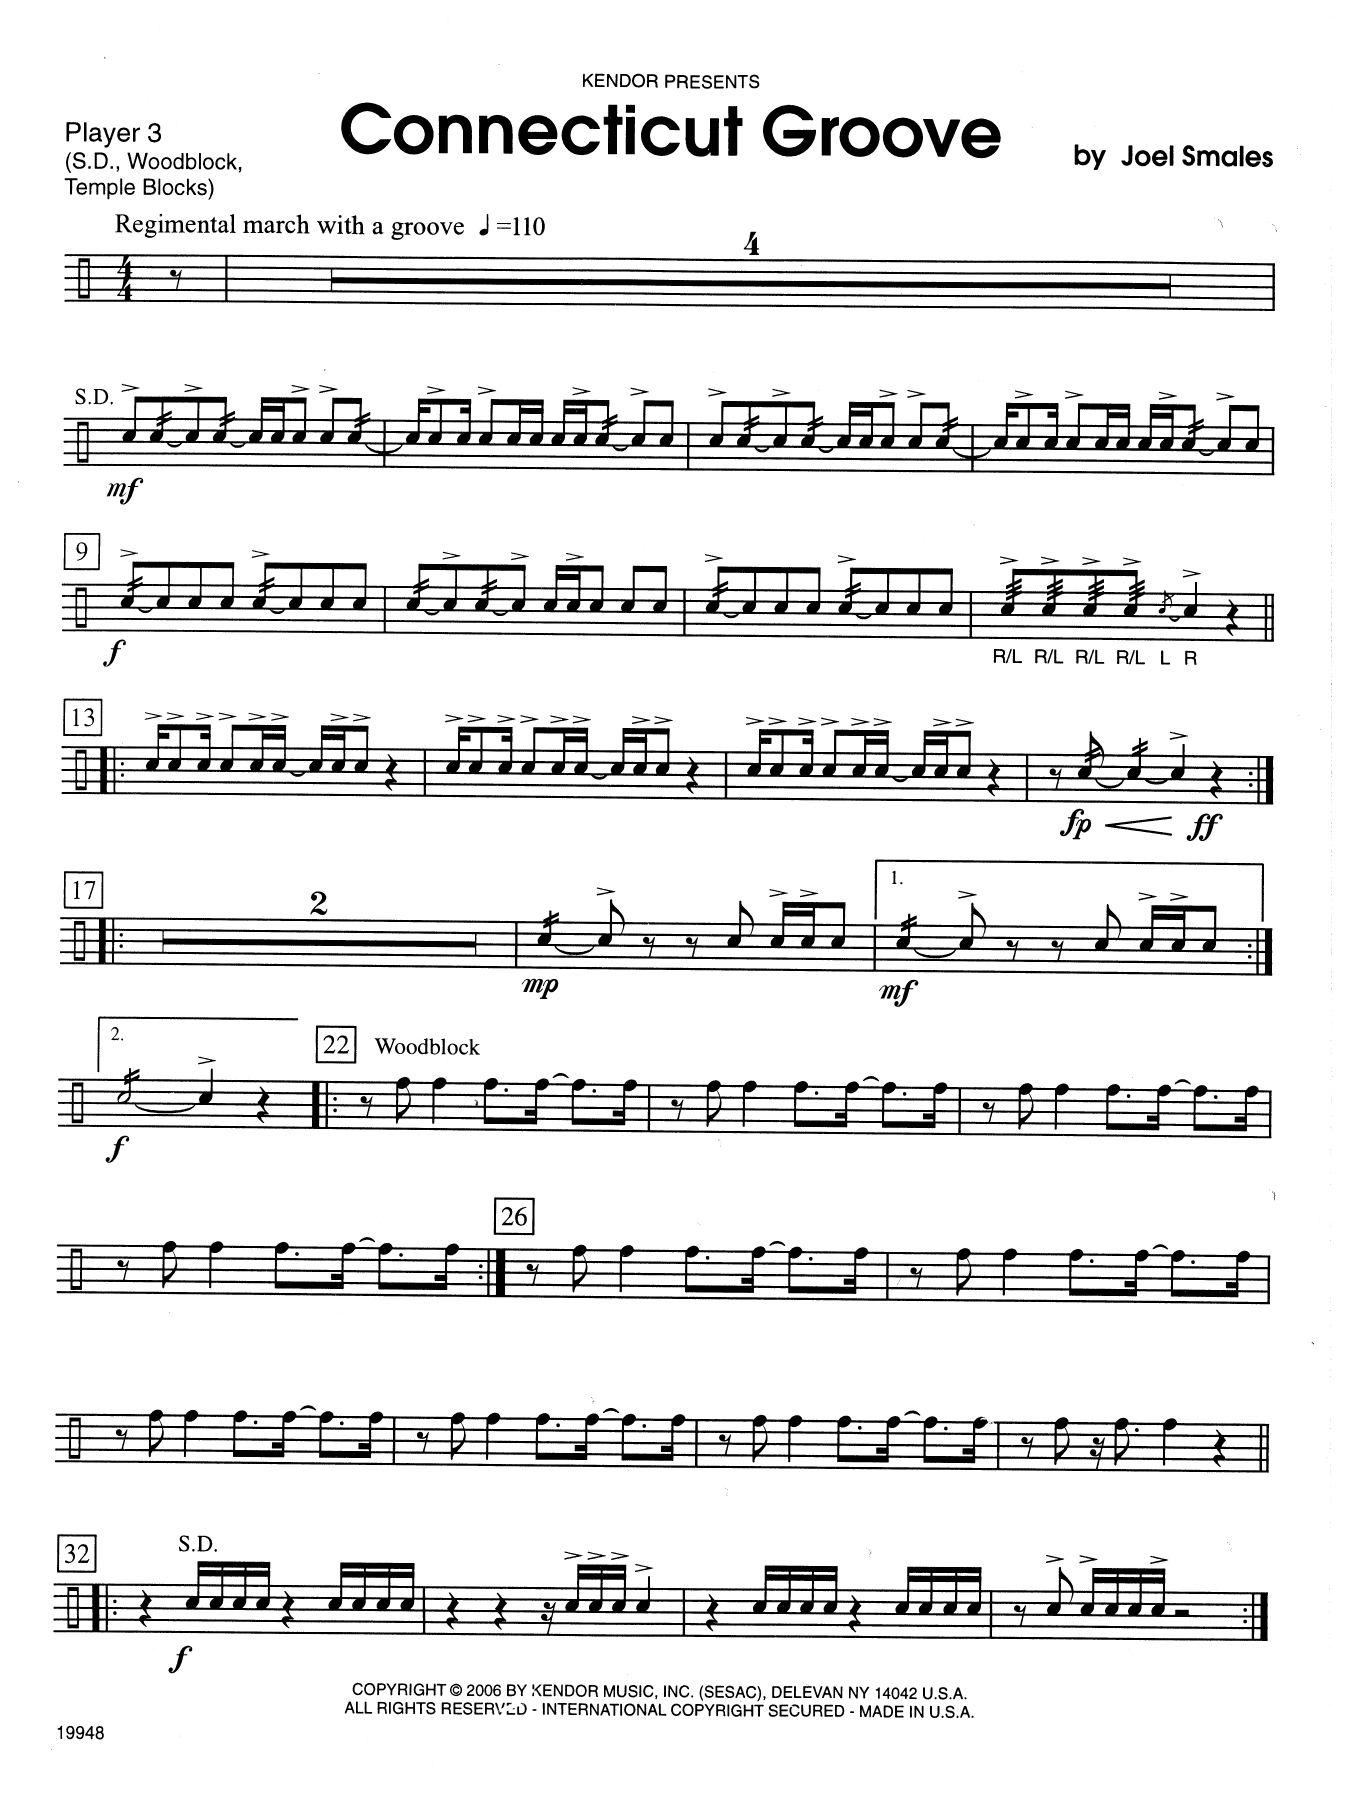 Download Joel Smales Connecticut Groove - Percussion 3 Sheet Music